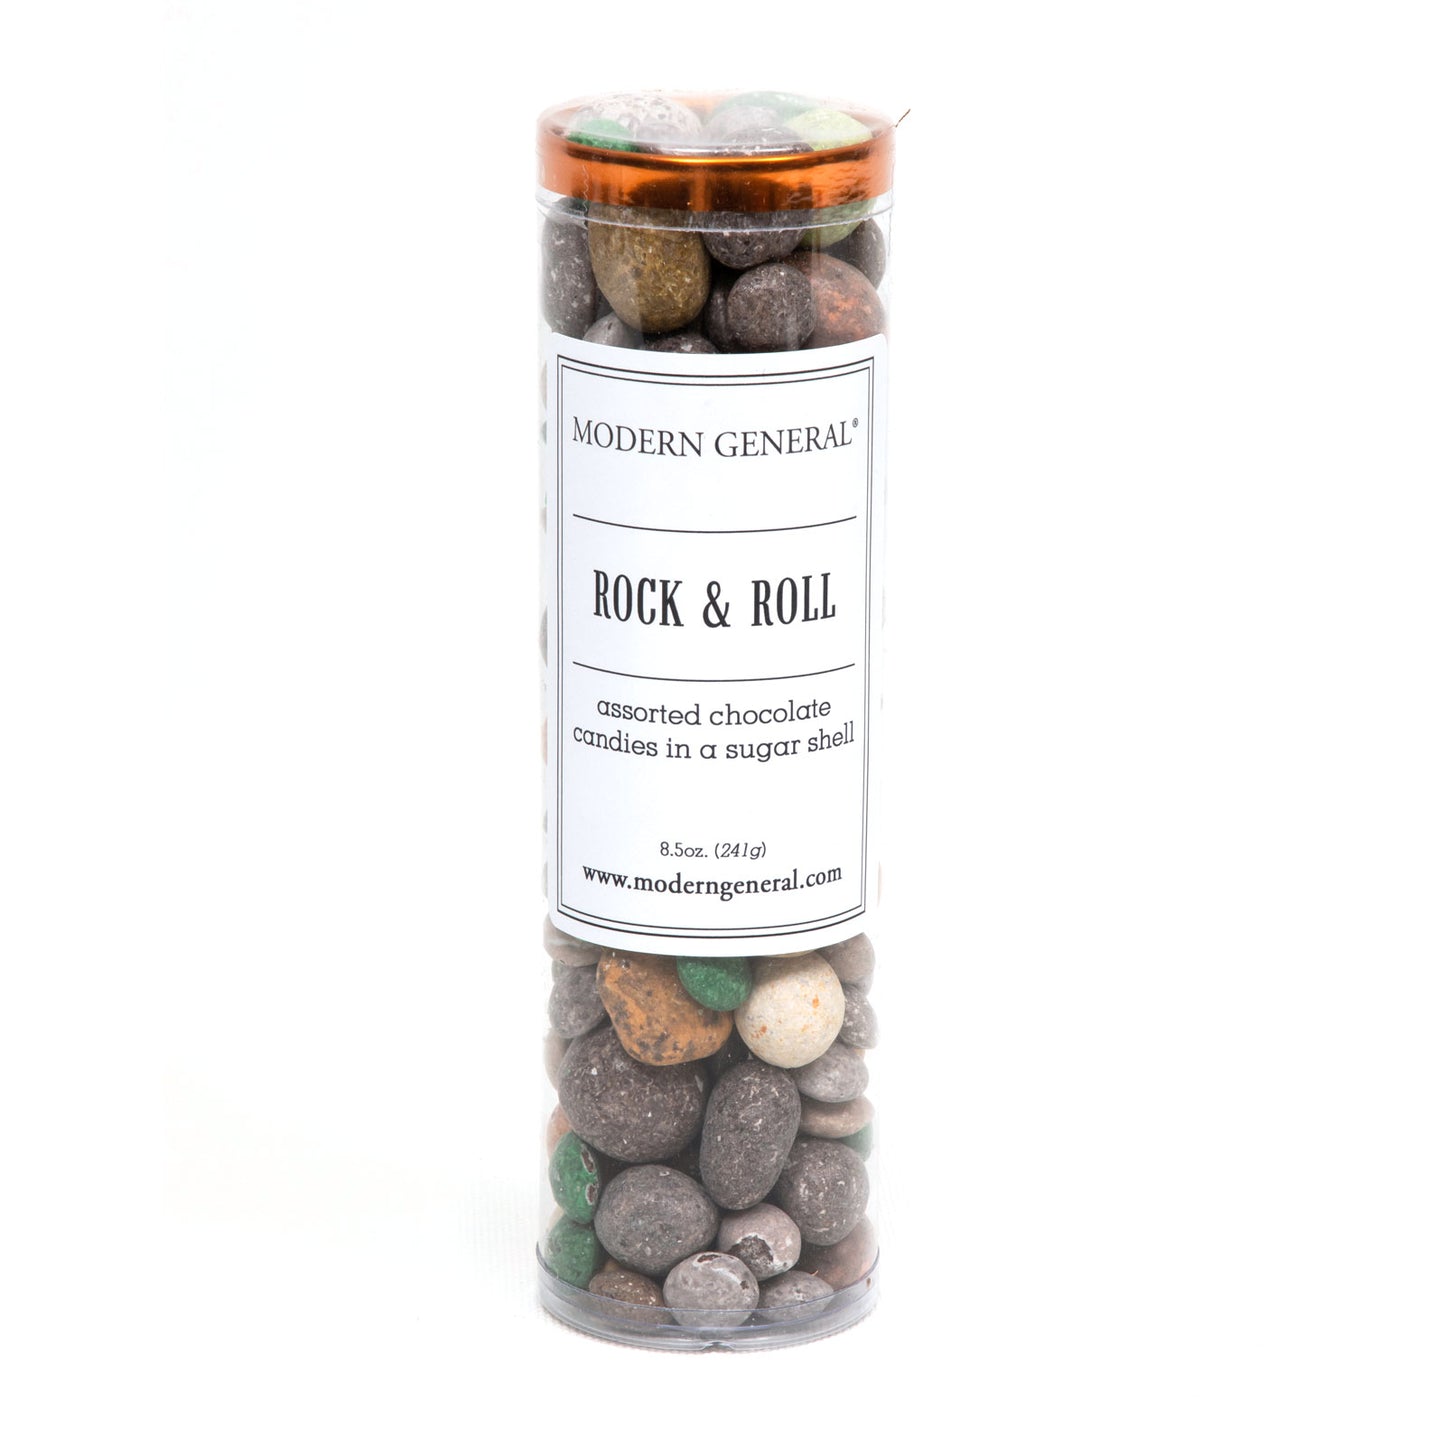 "Rock & Roll" Assorted Chocolates in a Sugar Shell